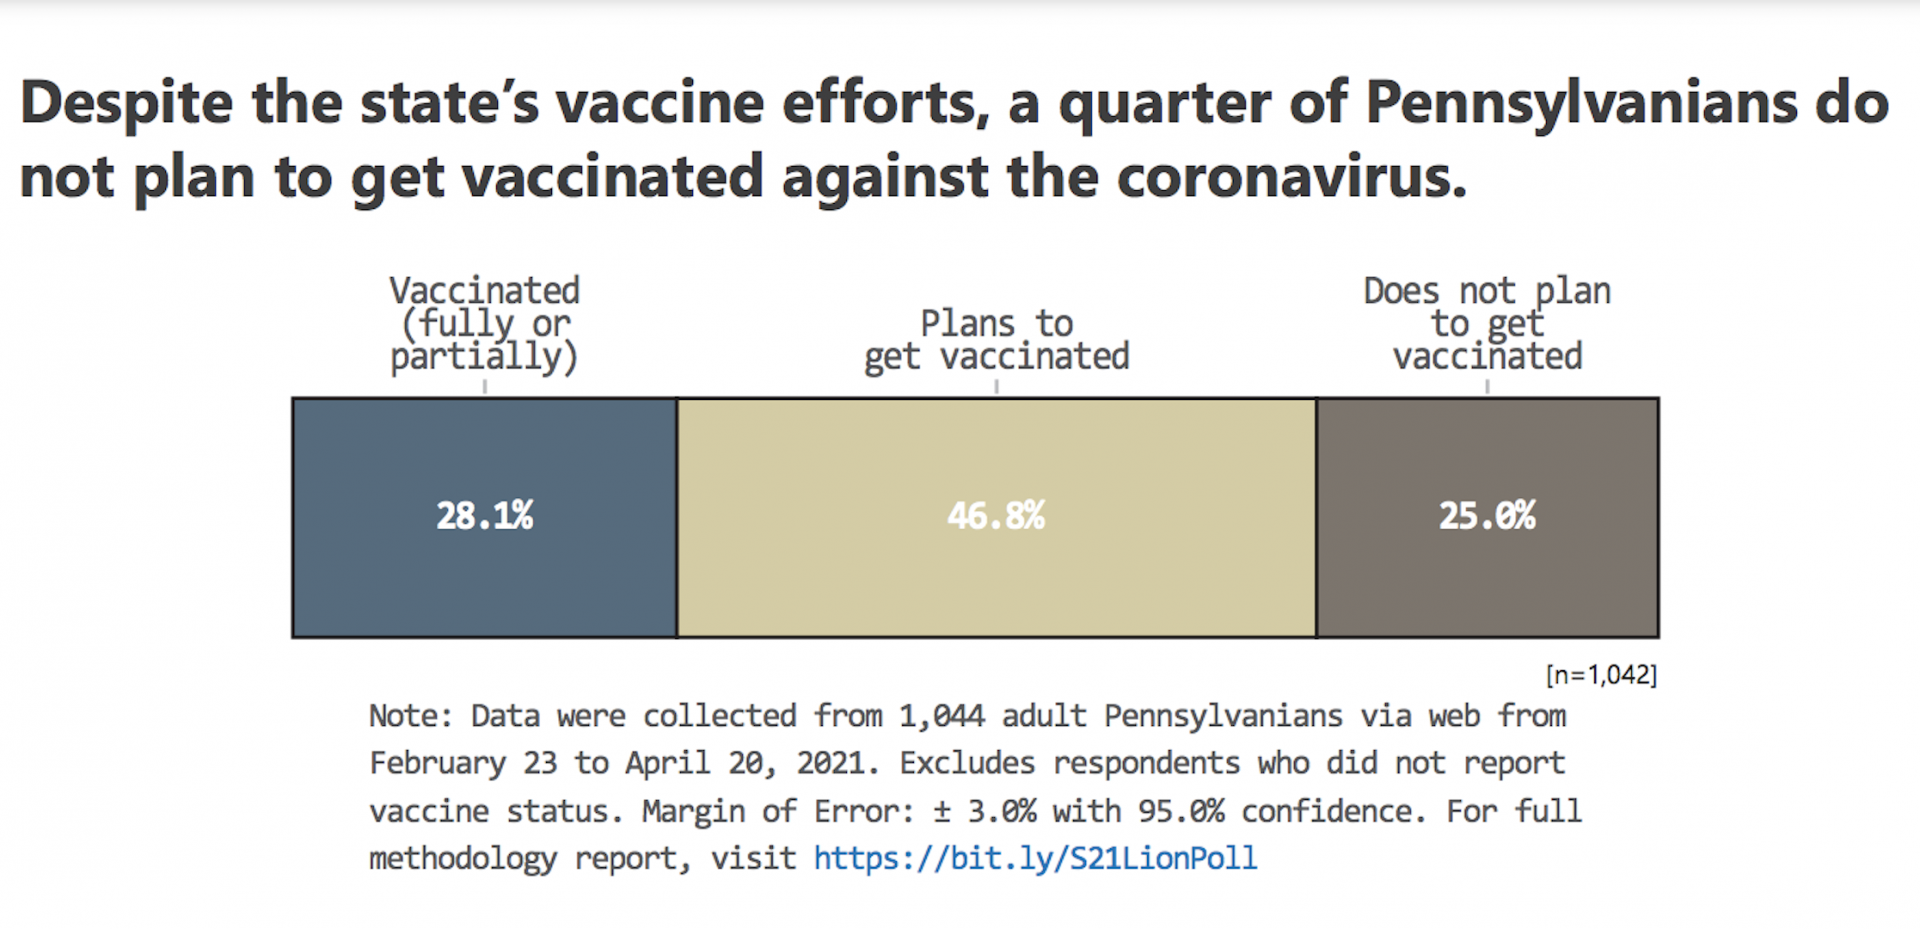 The vaccine hesitancy study found 1 in 4 Pennsylvanian's don't plan to get vaccinated.